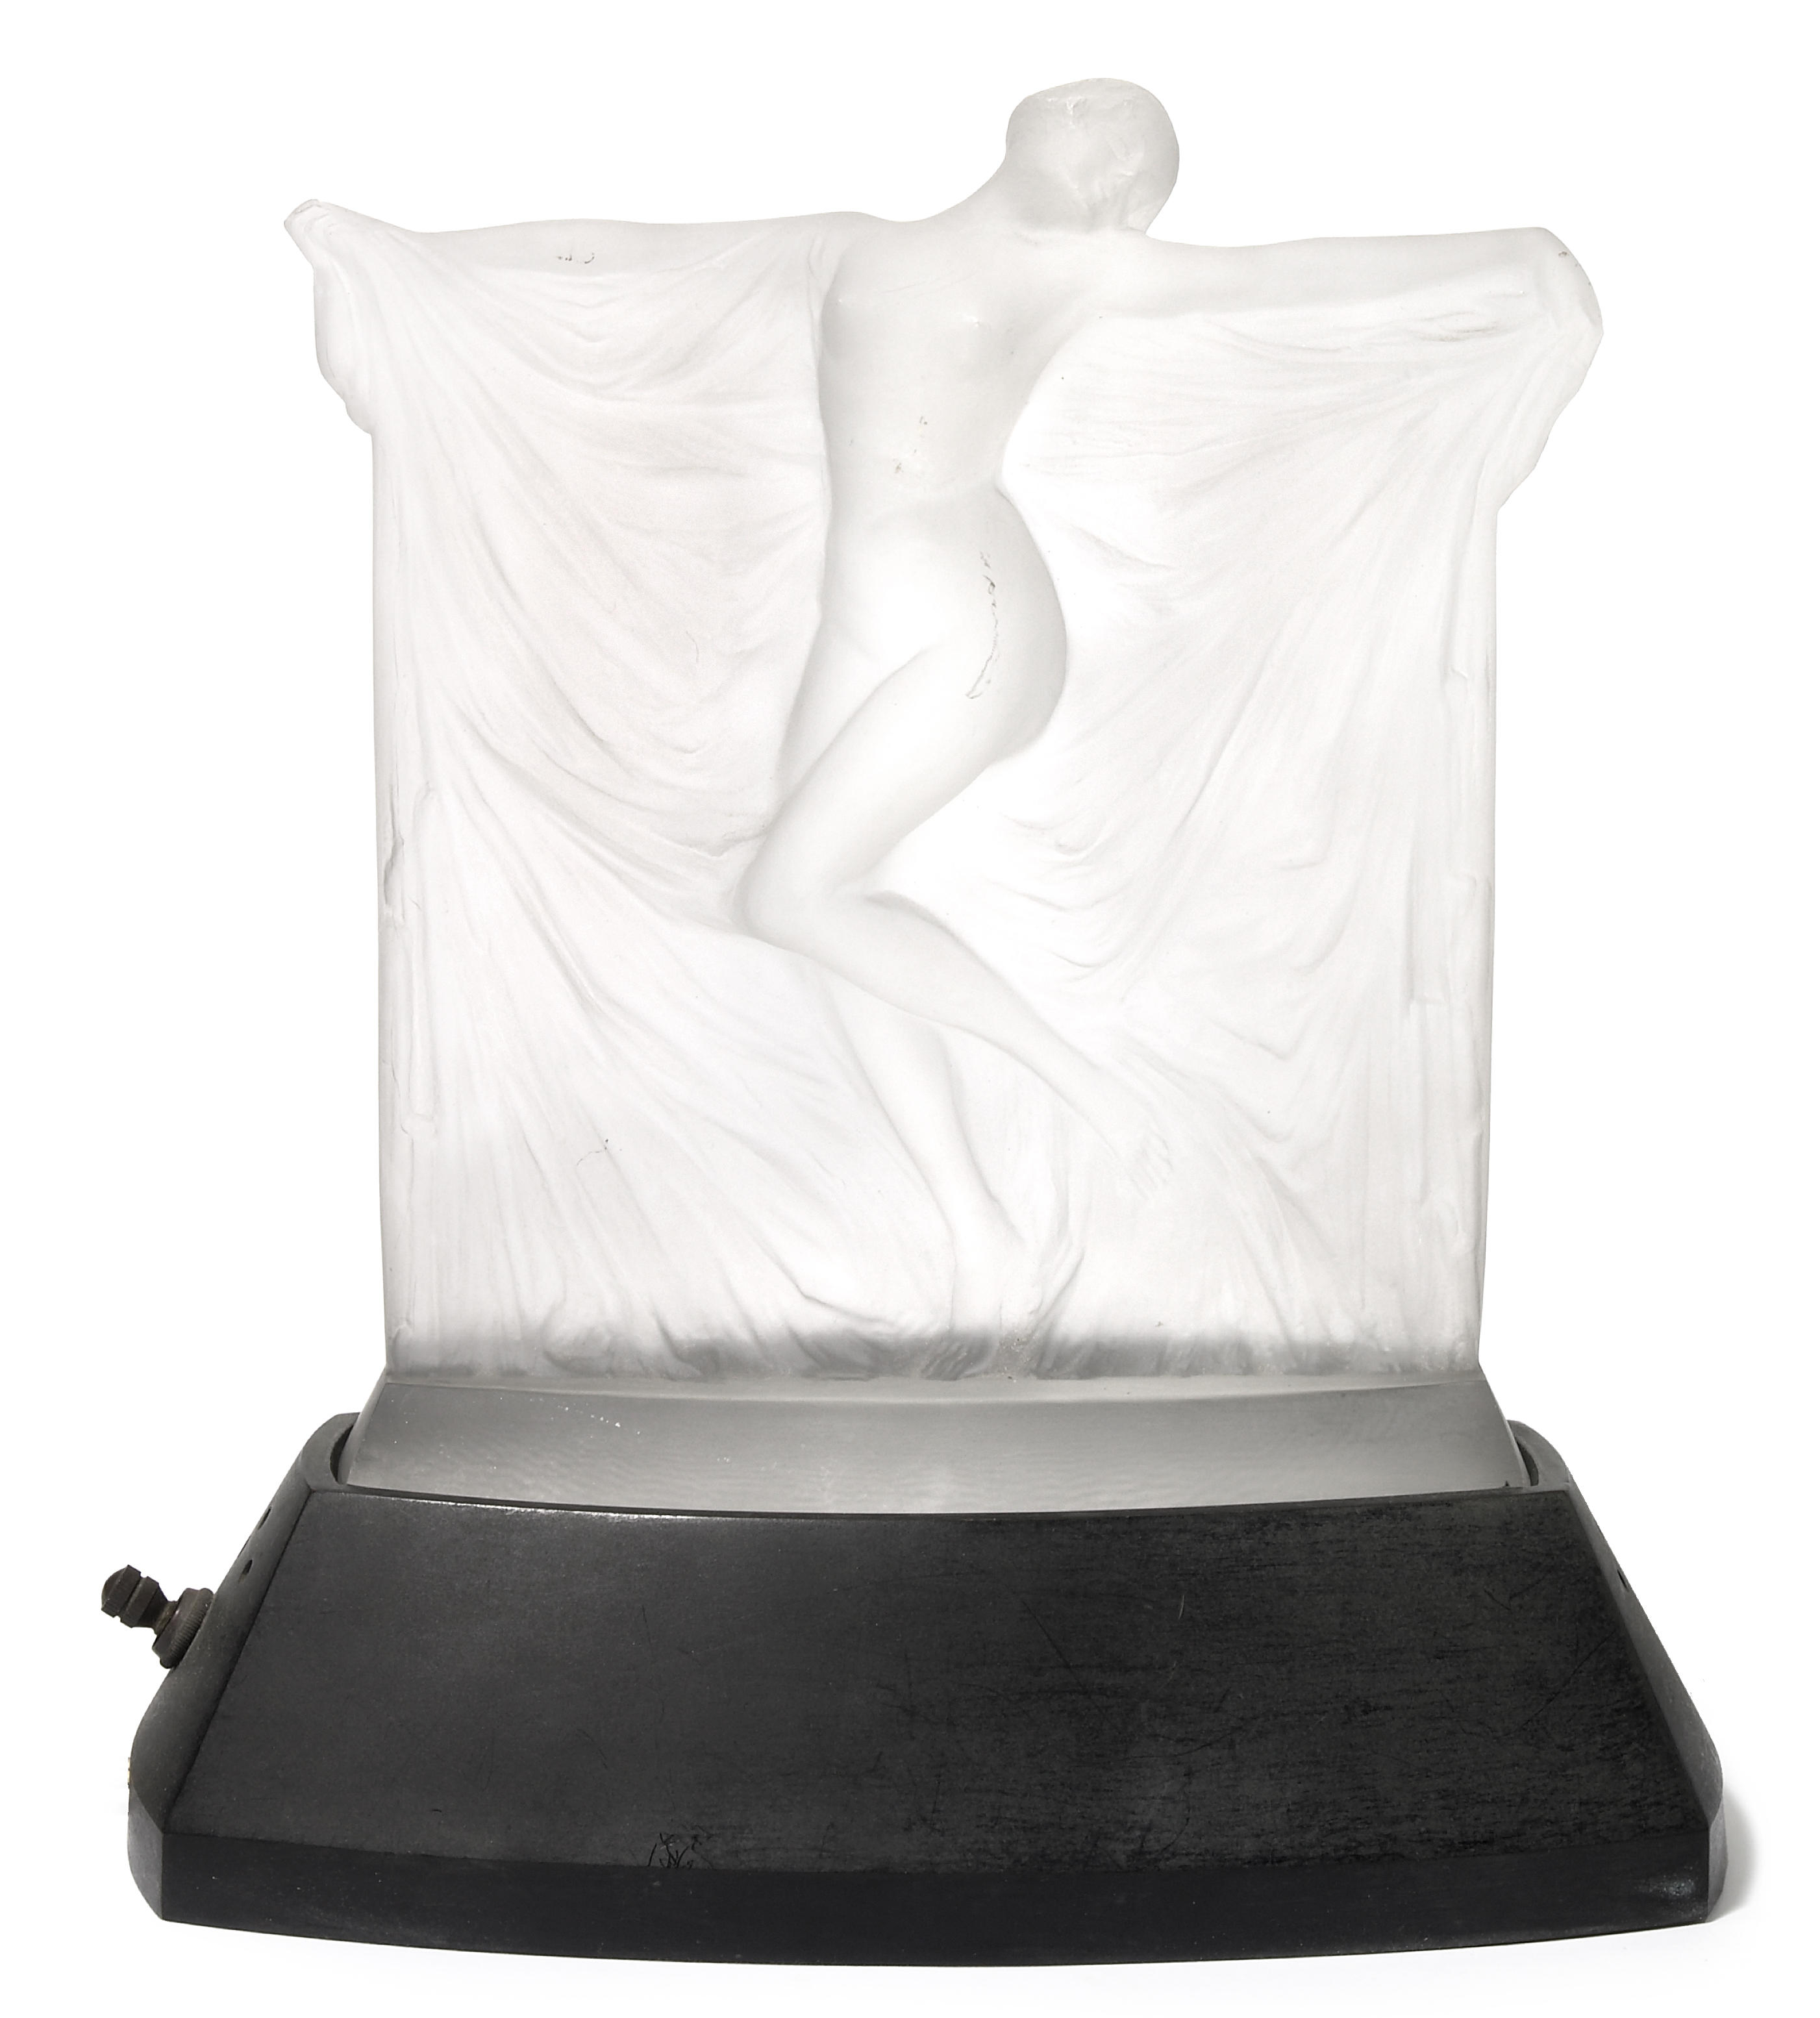 A Ren Lalique frosted glass statuette  12b962